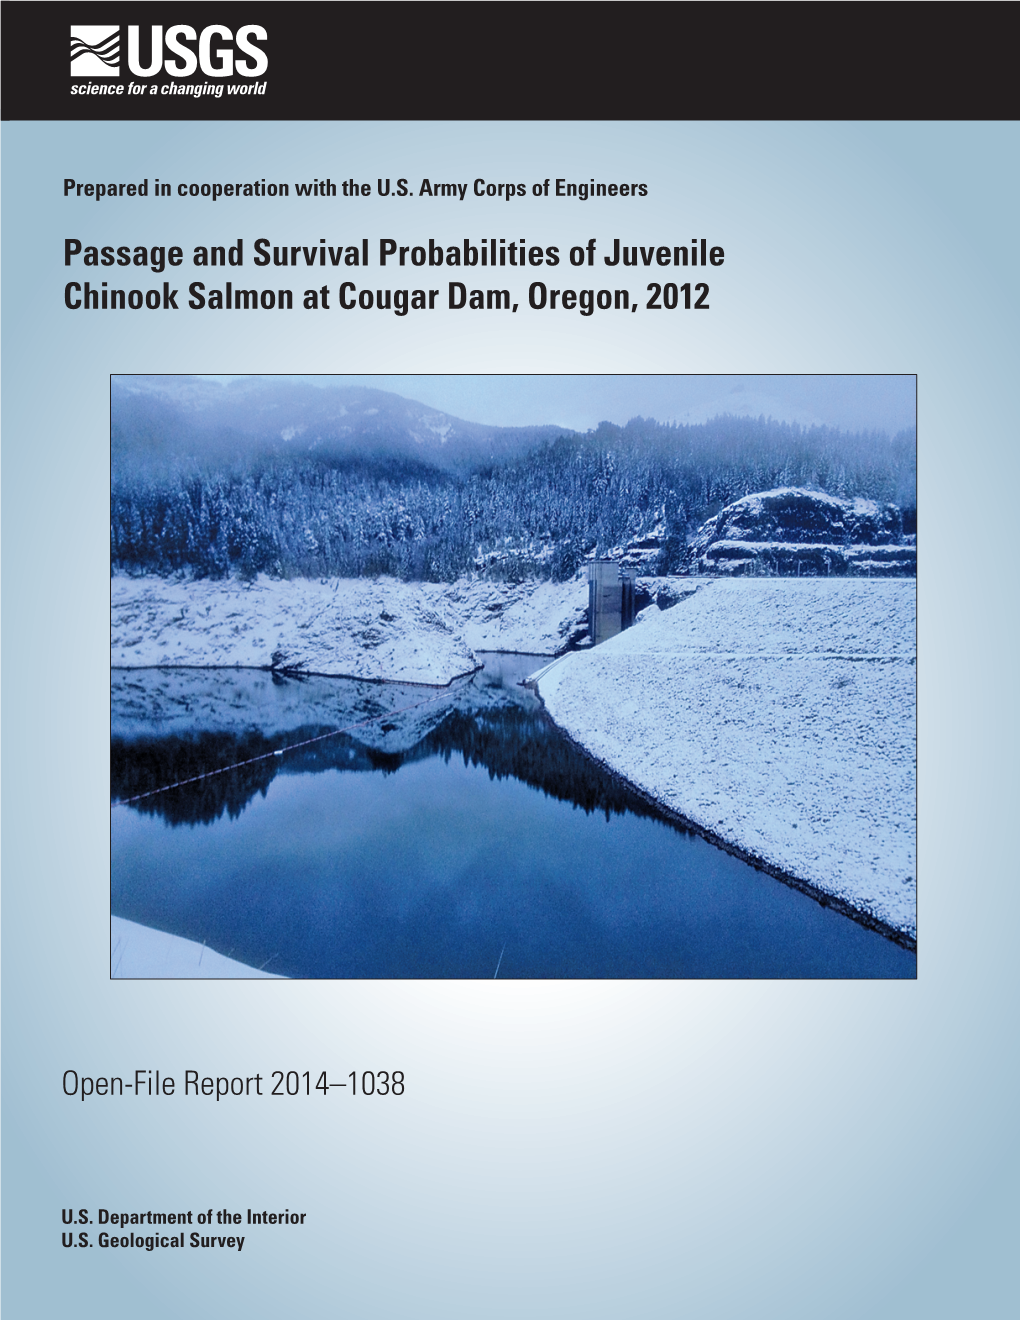 Passage and Survival Probabilities of Juvenile Chinook Salmon at Cougar Dam, Oregon, 2012